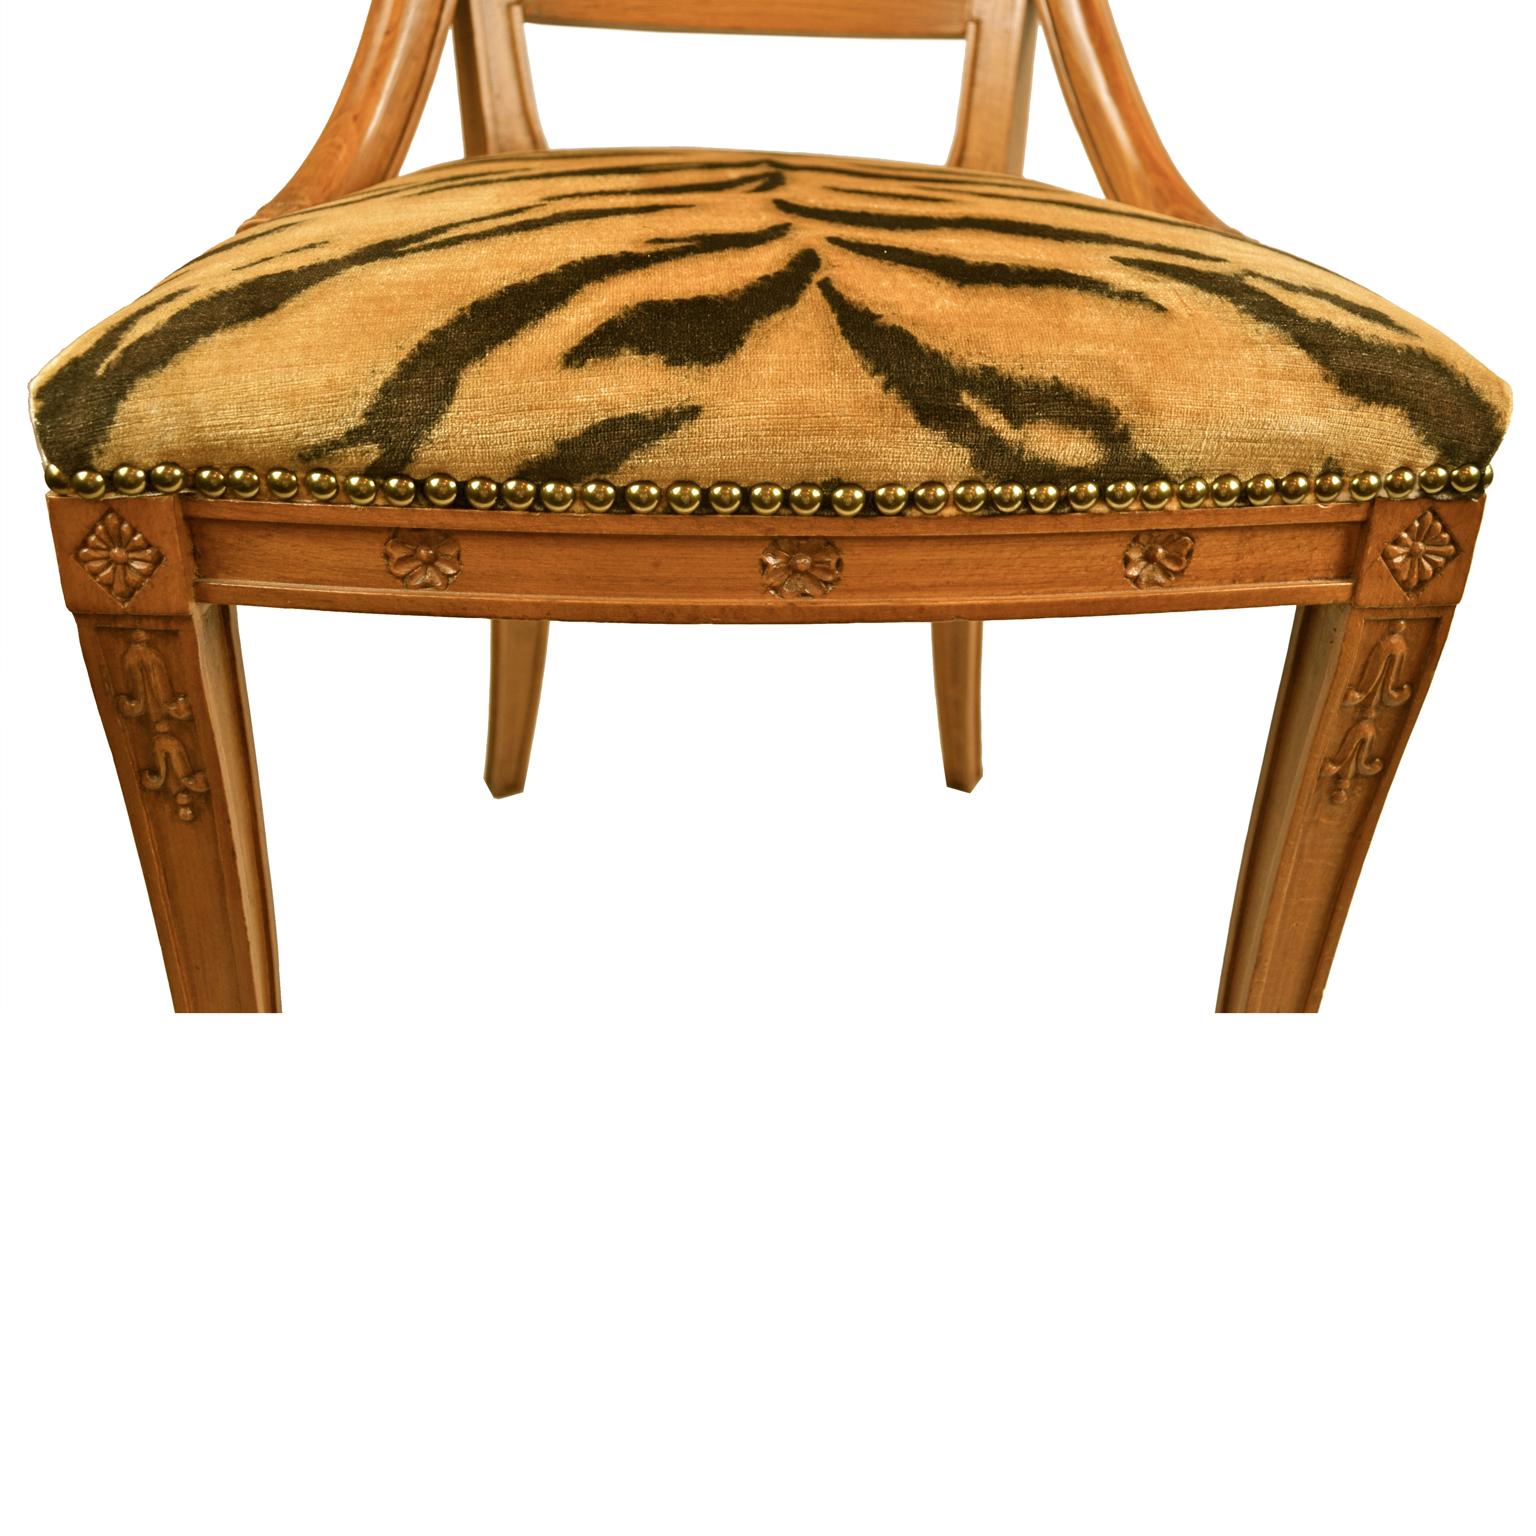 Hand-Carved 19th Century Neoclassical Swedish Chair Upholstered in Tiger Velvet